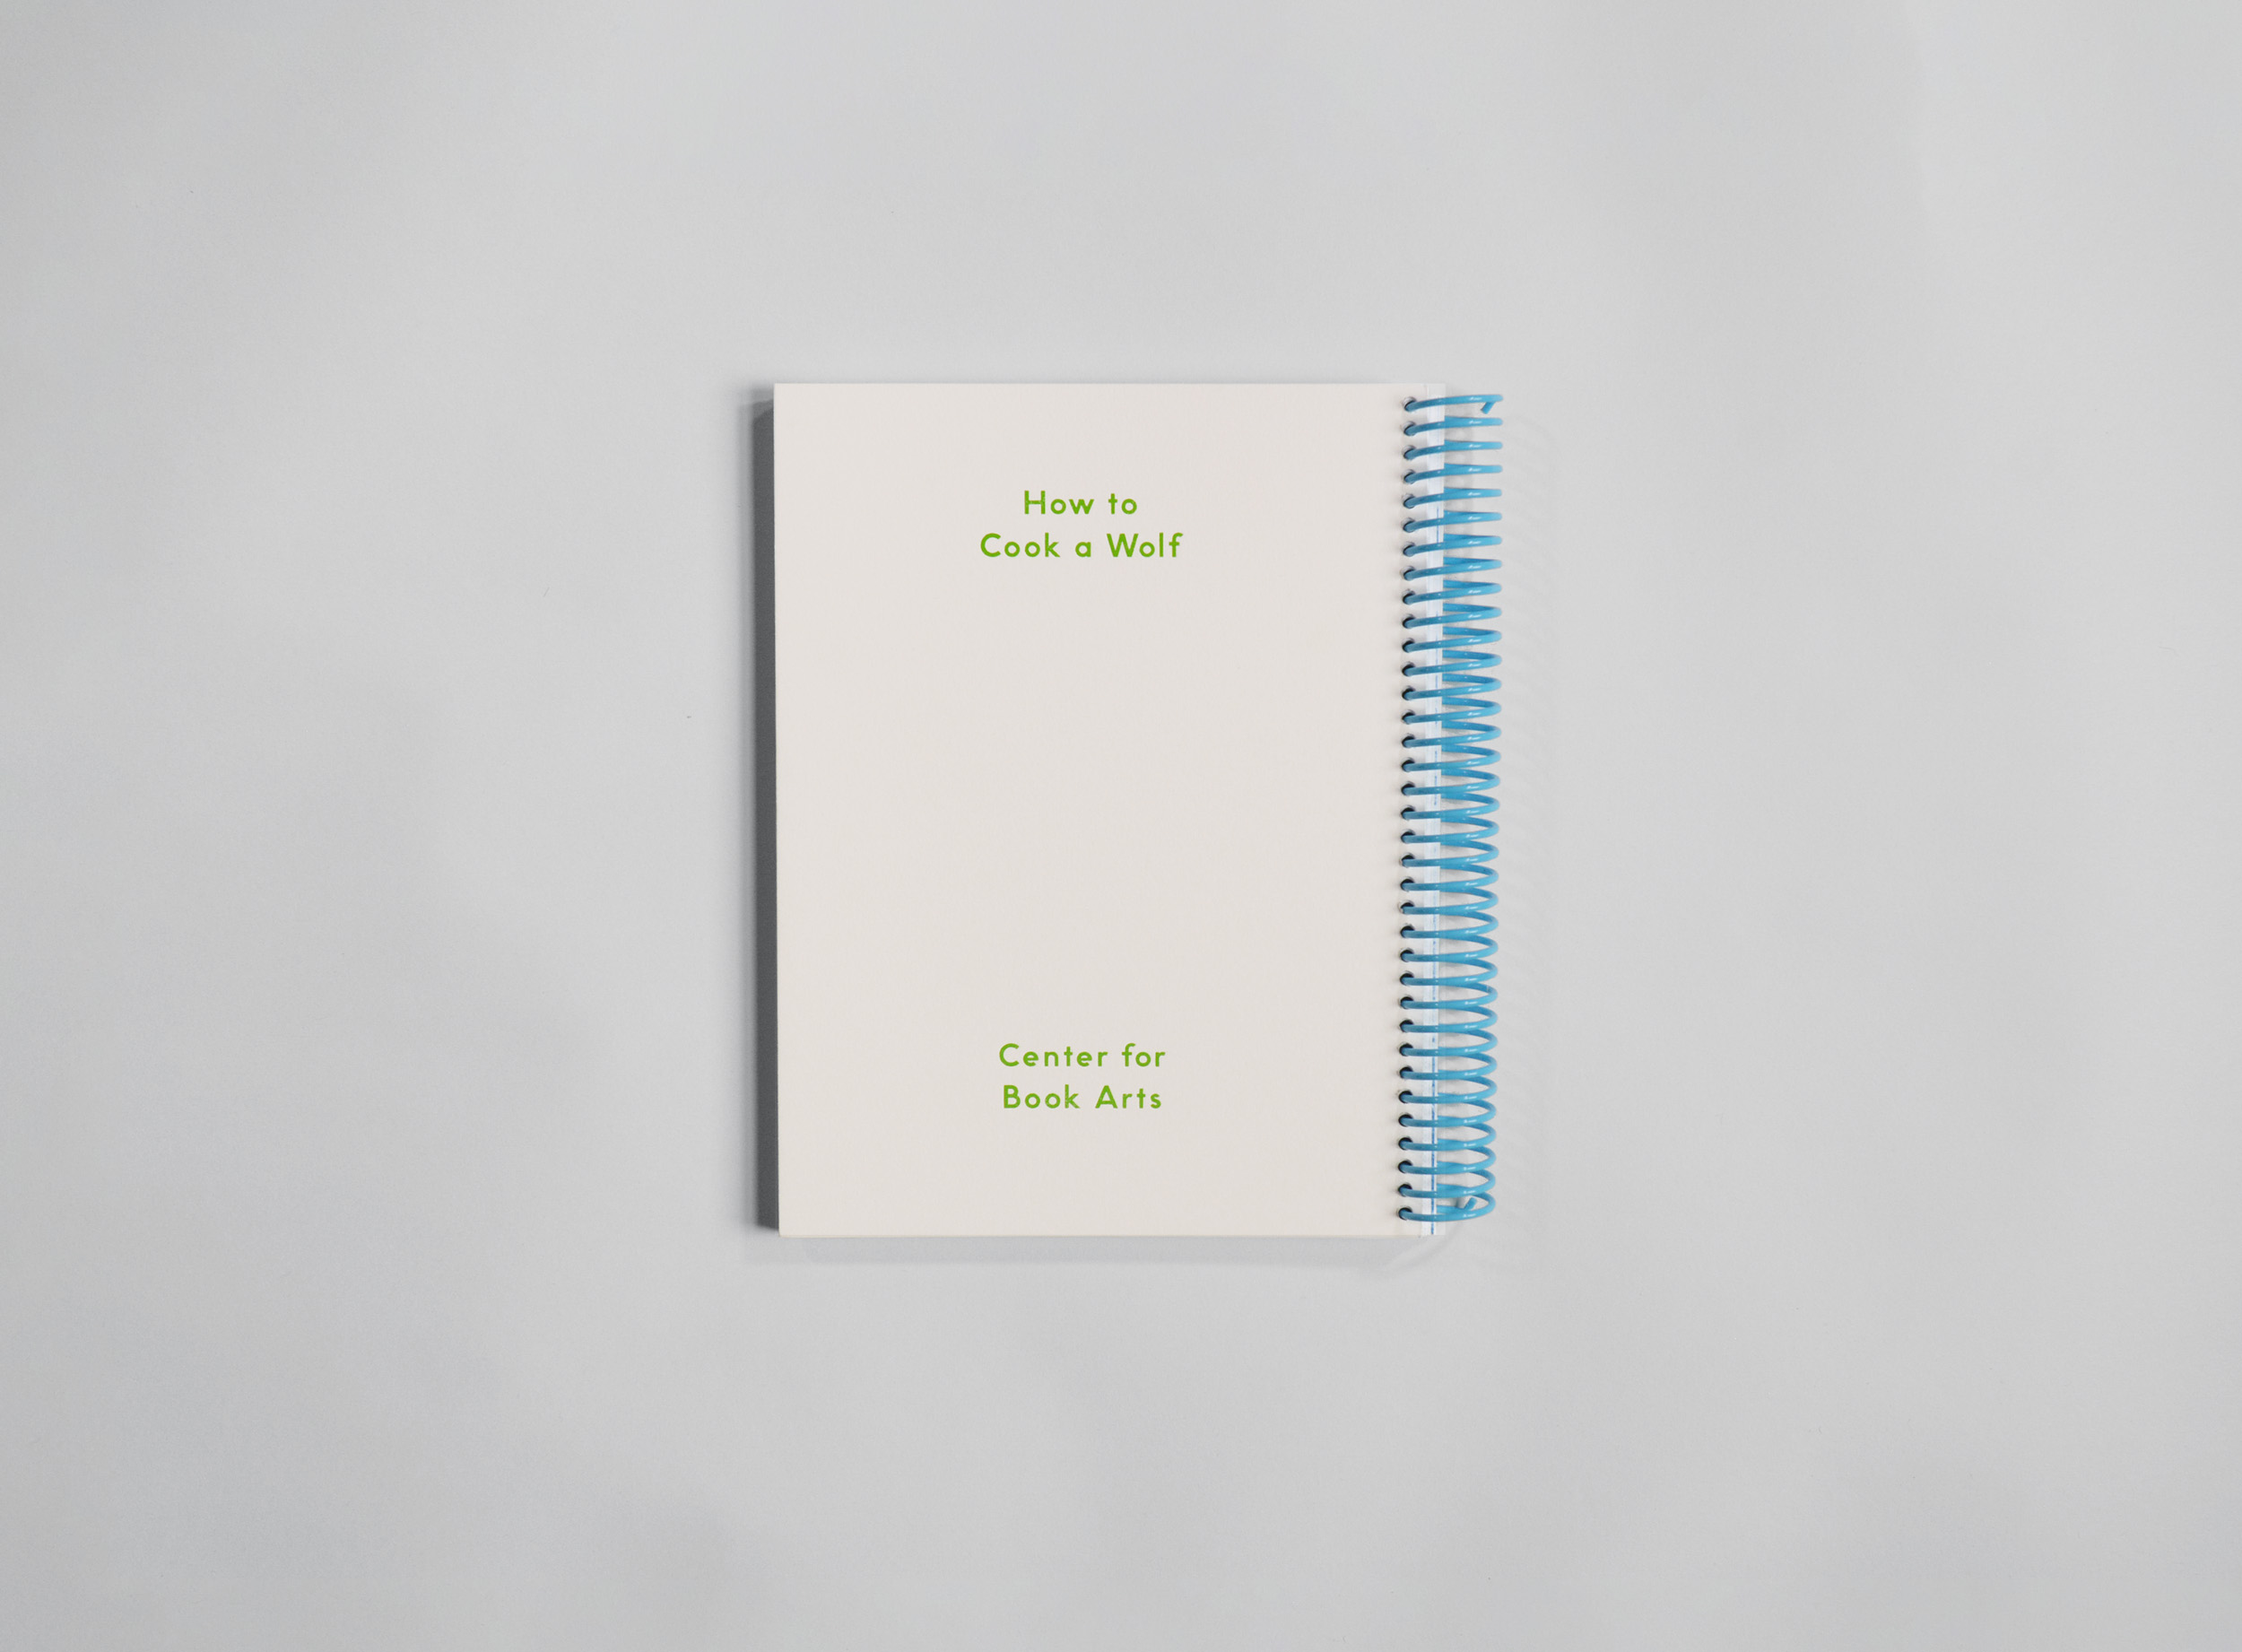 Back cover of exhibition catalog with green foil stamping that reads "How to Cook A Wolf / Center for Book Arts" on white paper, bound with a blue spiral coil.